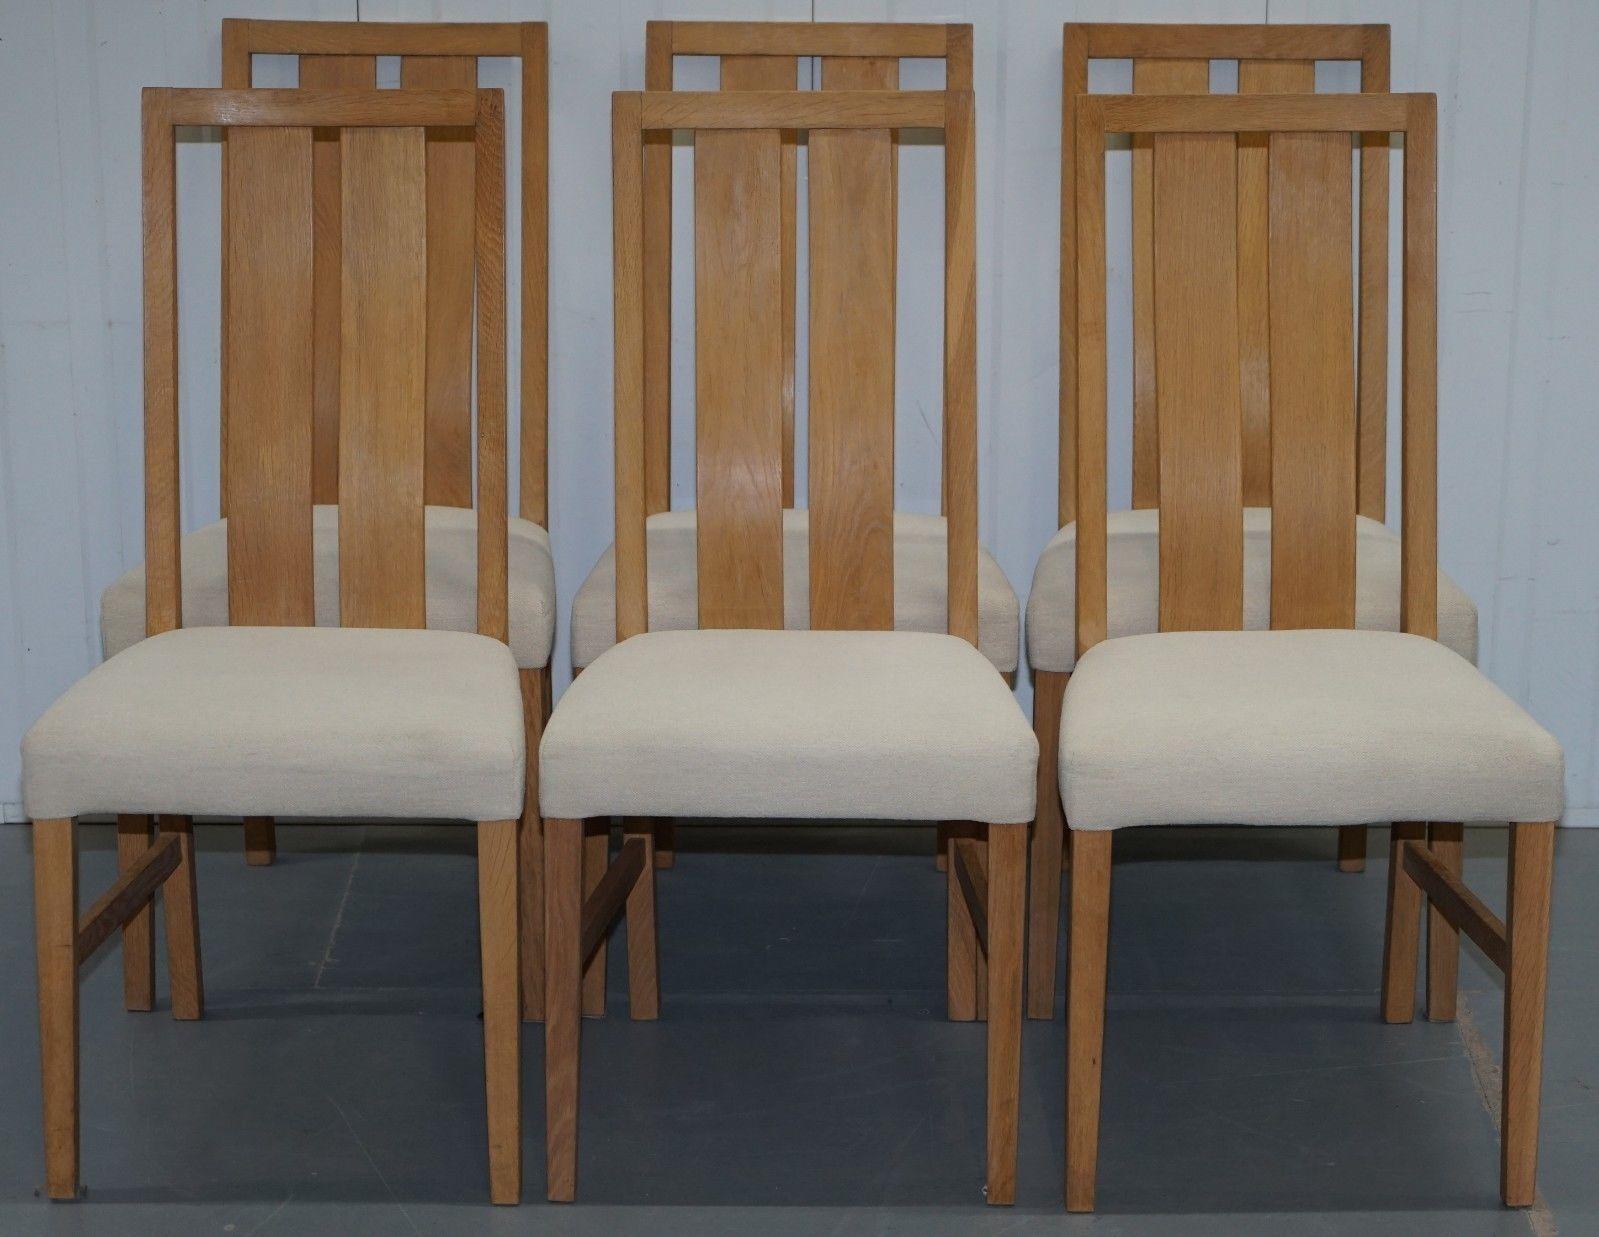 We are delighted to offer for sale this lovely set of original Orum Mobler Ash dining chairs.

These chairs are part of a suite, I have the matching bookcase, sideboard and extending dining table, I have included a picture of each, however, these